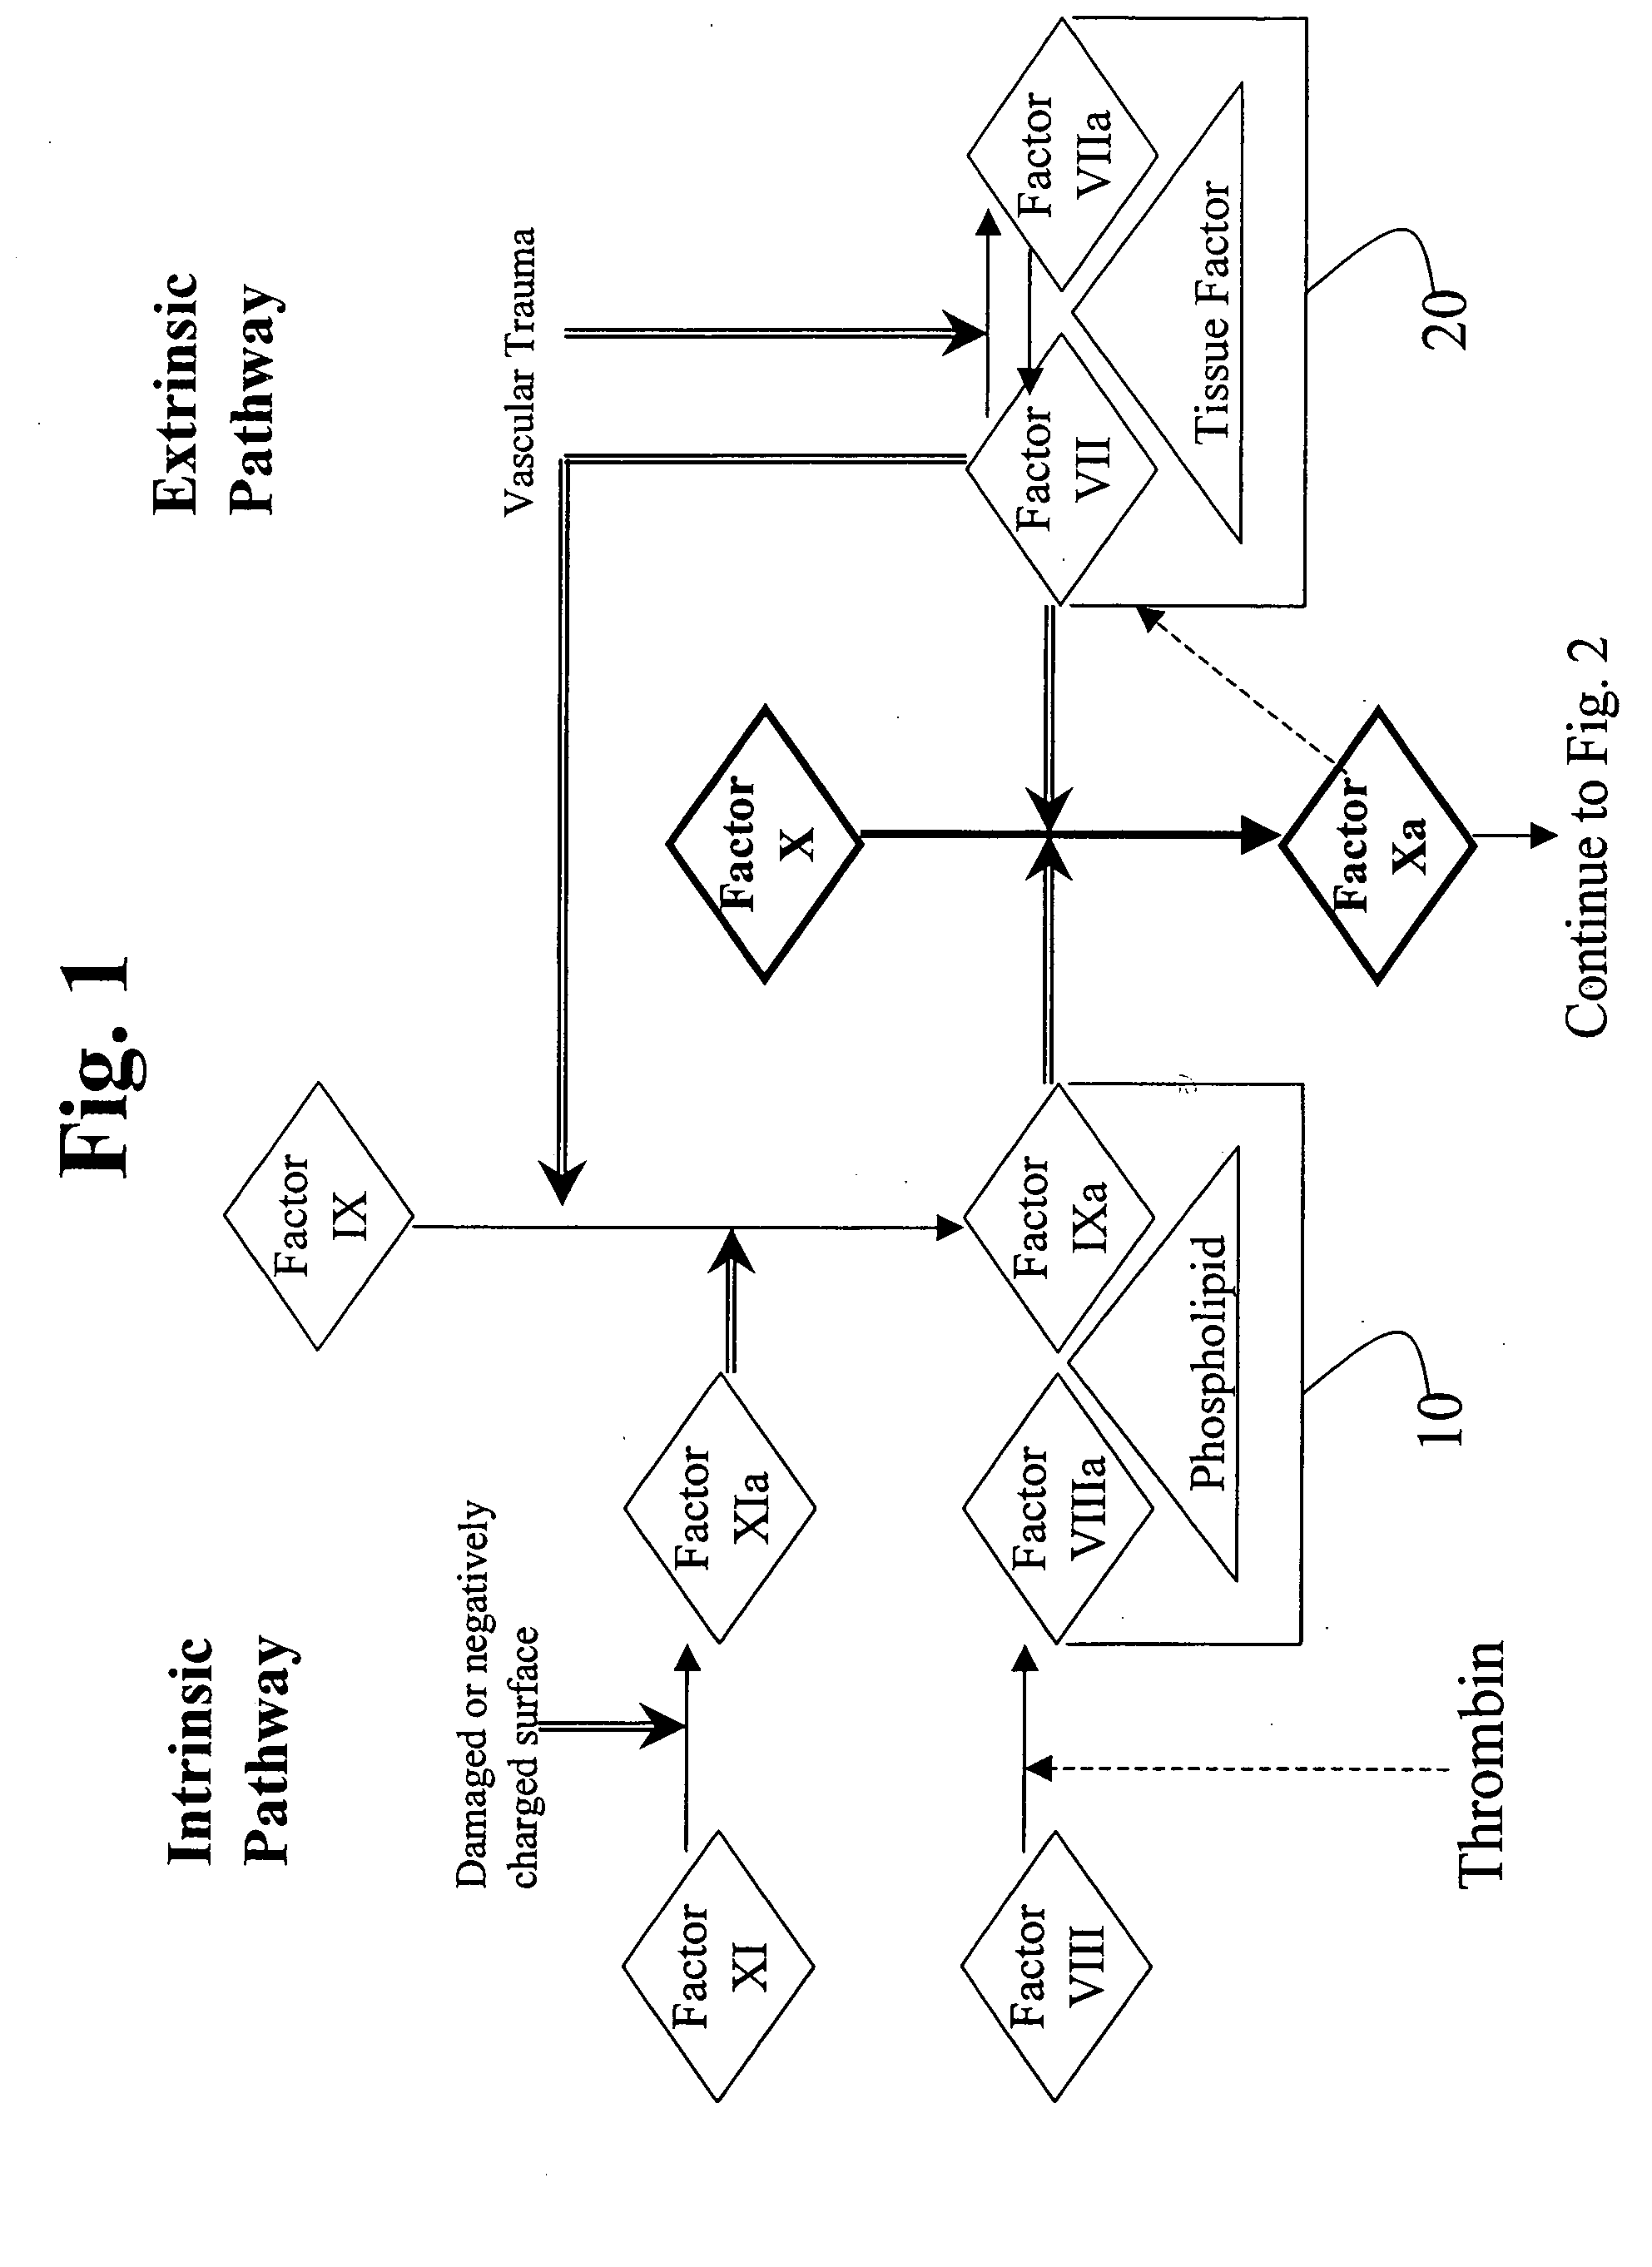 Aryl and heteroaryl compounds, compositions, methods of use